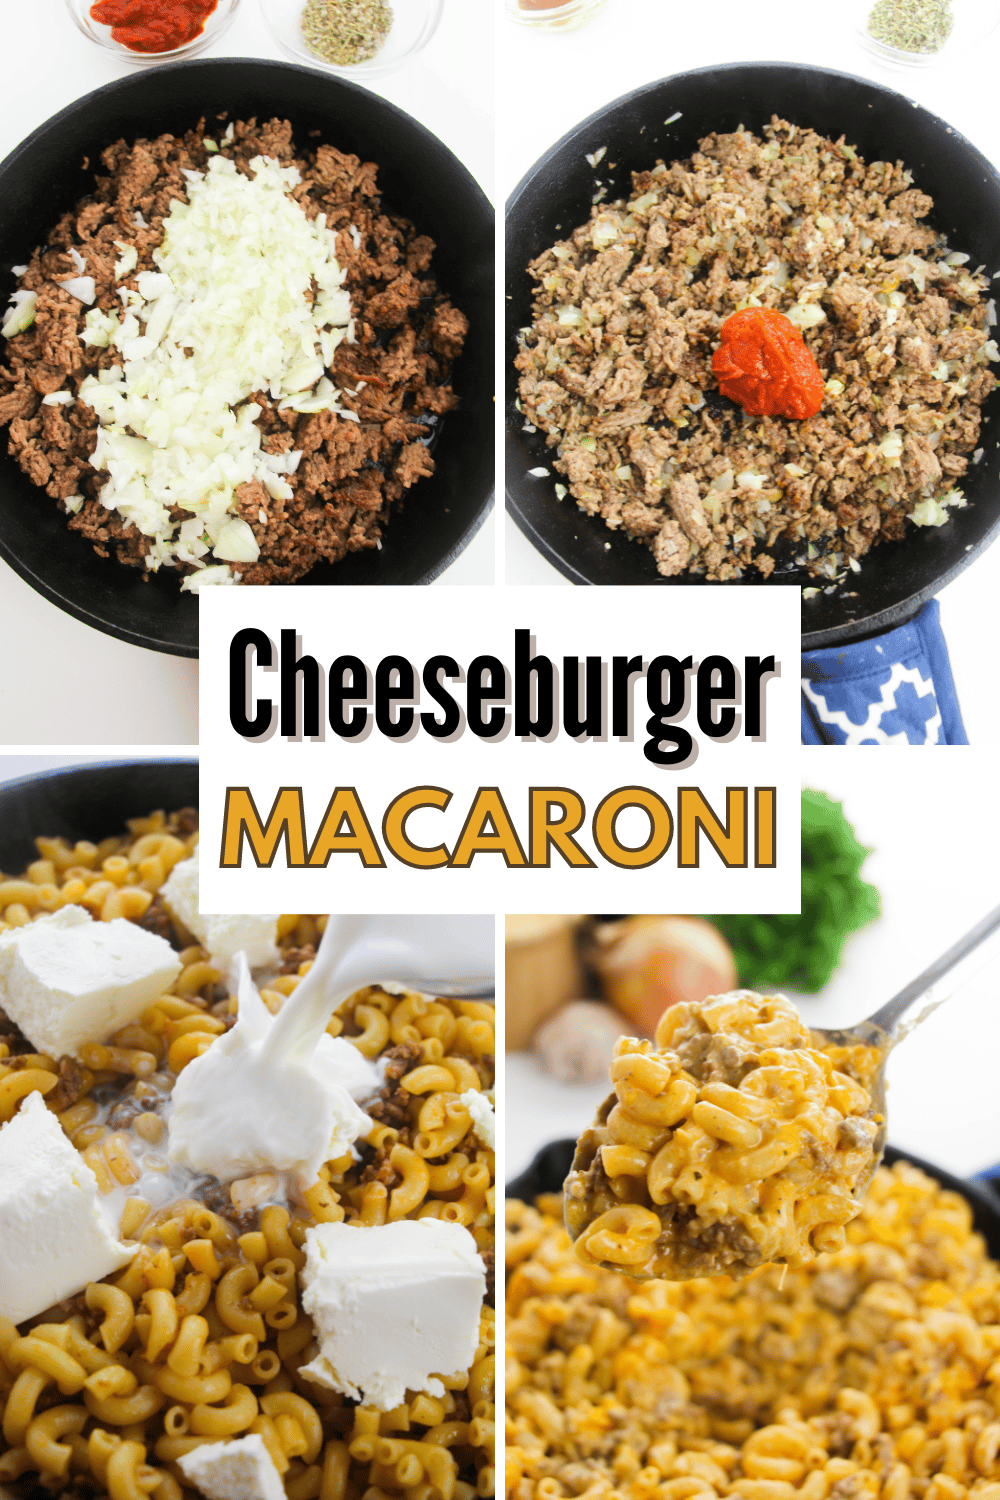 This Cheeseburger Macaroni is easy to make, cheesy, and oh so delicious. Your entire family will love this quick weeknight meal. #cheeseburgermacaroni #onepotmeal #homemadehamburgerhelper #pasta #dinnerrecipe via @wondermomwannab